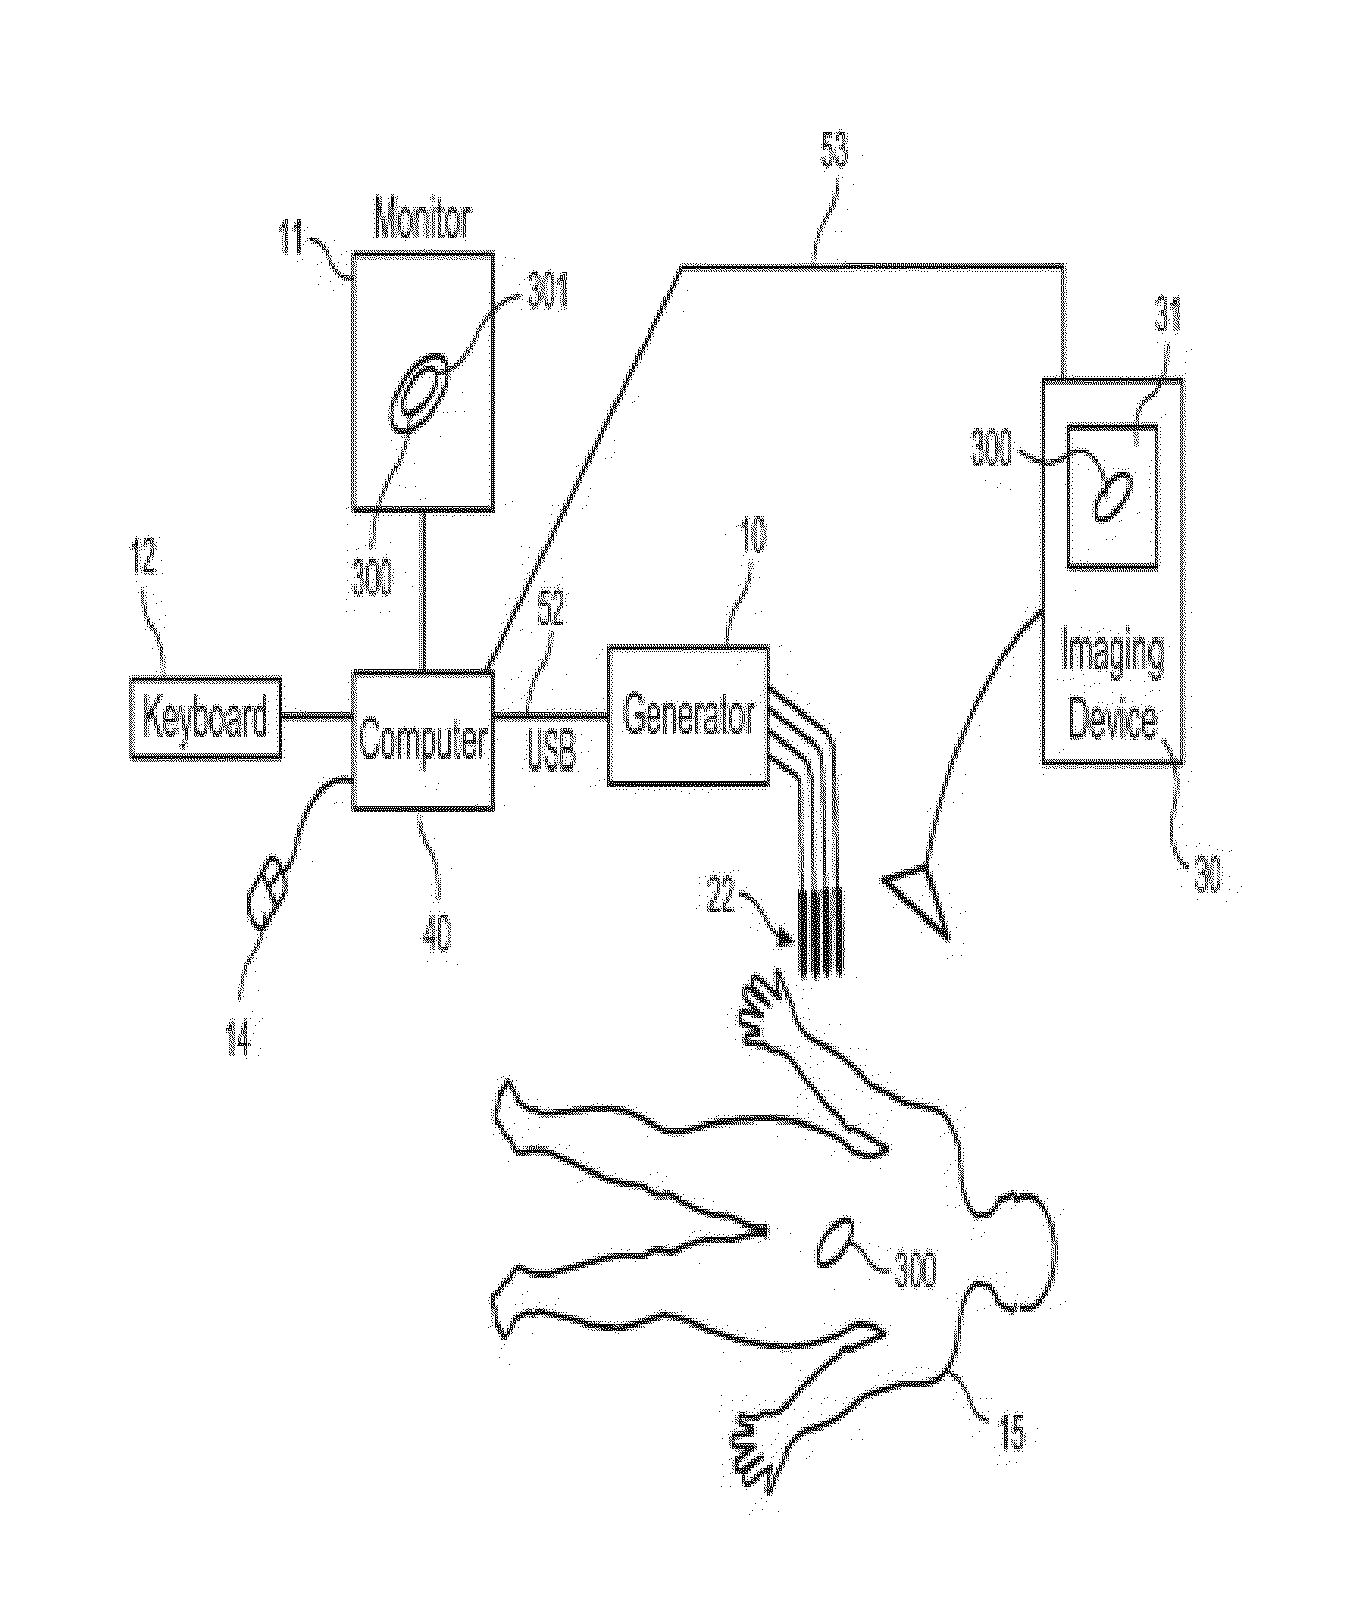 System and method for estimating a treatment volume for administering electrical-energy based therapies